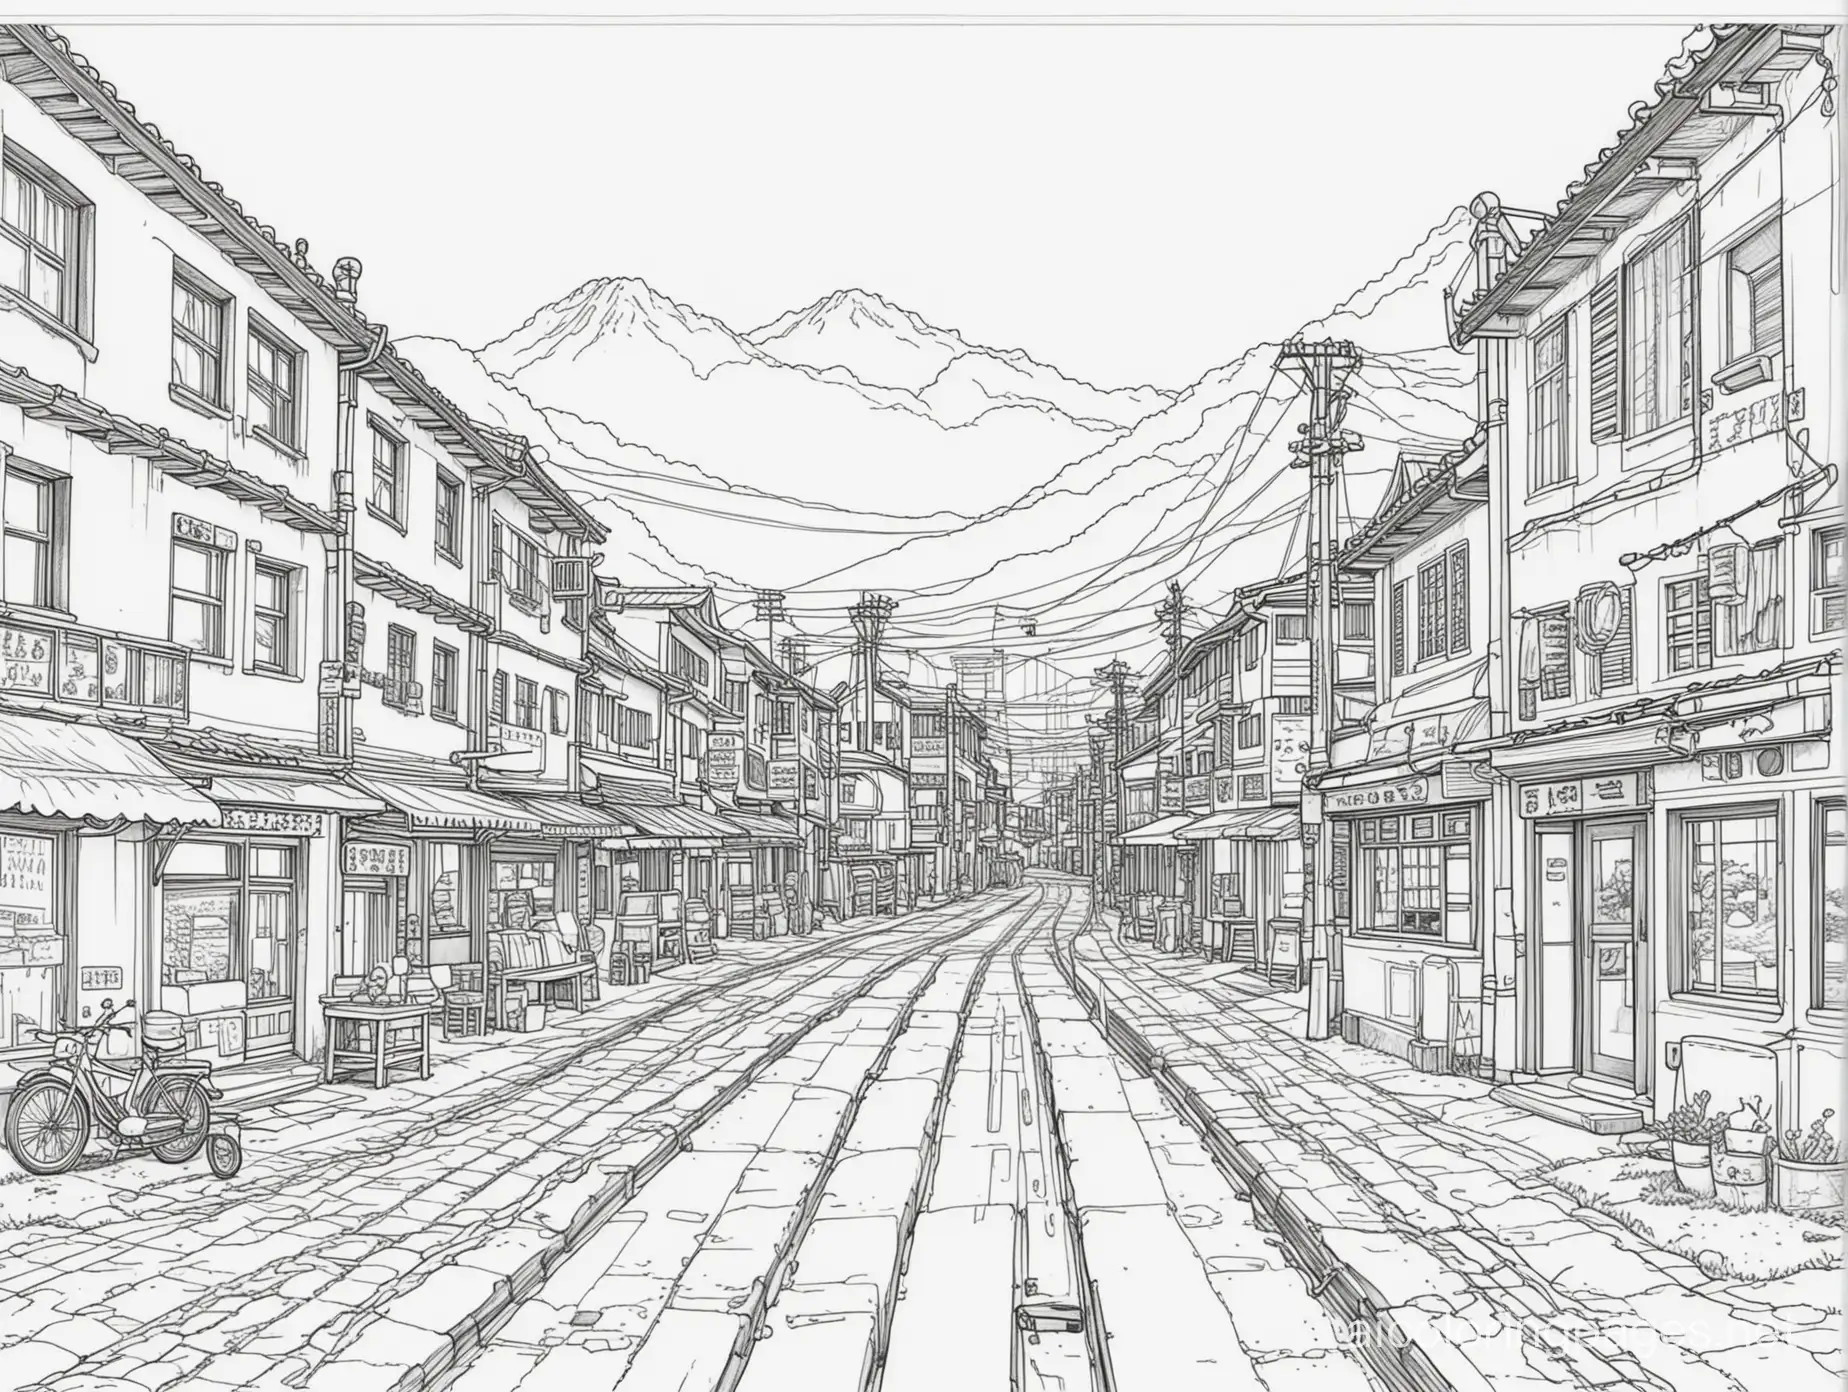 Showa Town, Coloring Page, black and white, line art, white background, Simplicity, Ample White Space. The background of the coloring page is plain white to make it easy for young children to color within the lines. The outlines of all the subjects are easy to distinguish, making it simple for kids to color without too much difficulty